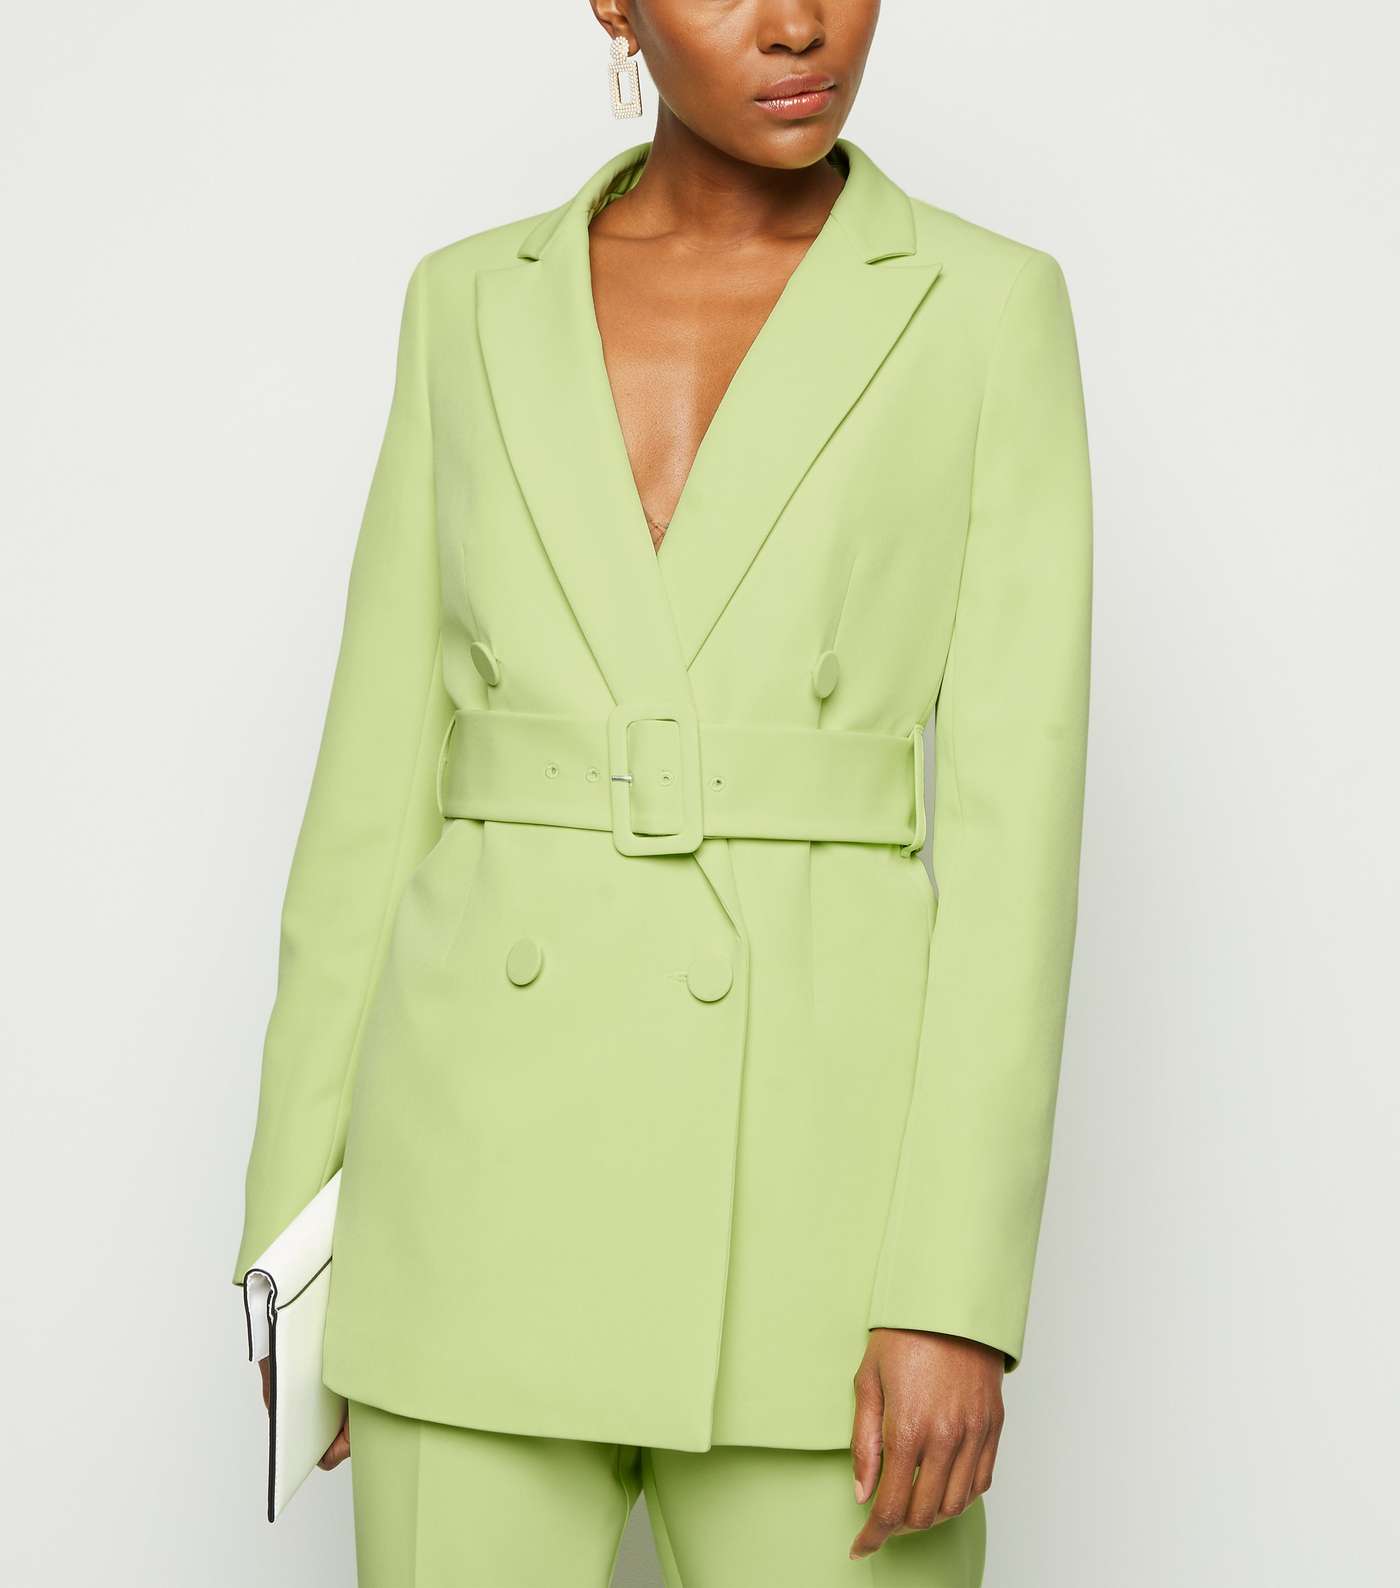 Green Neon Double Breasted Belted Blazer Image 2